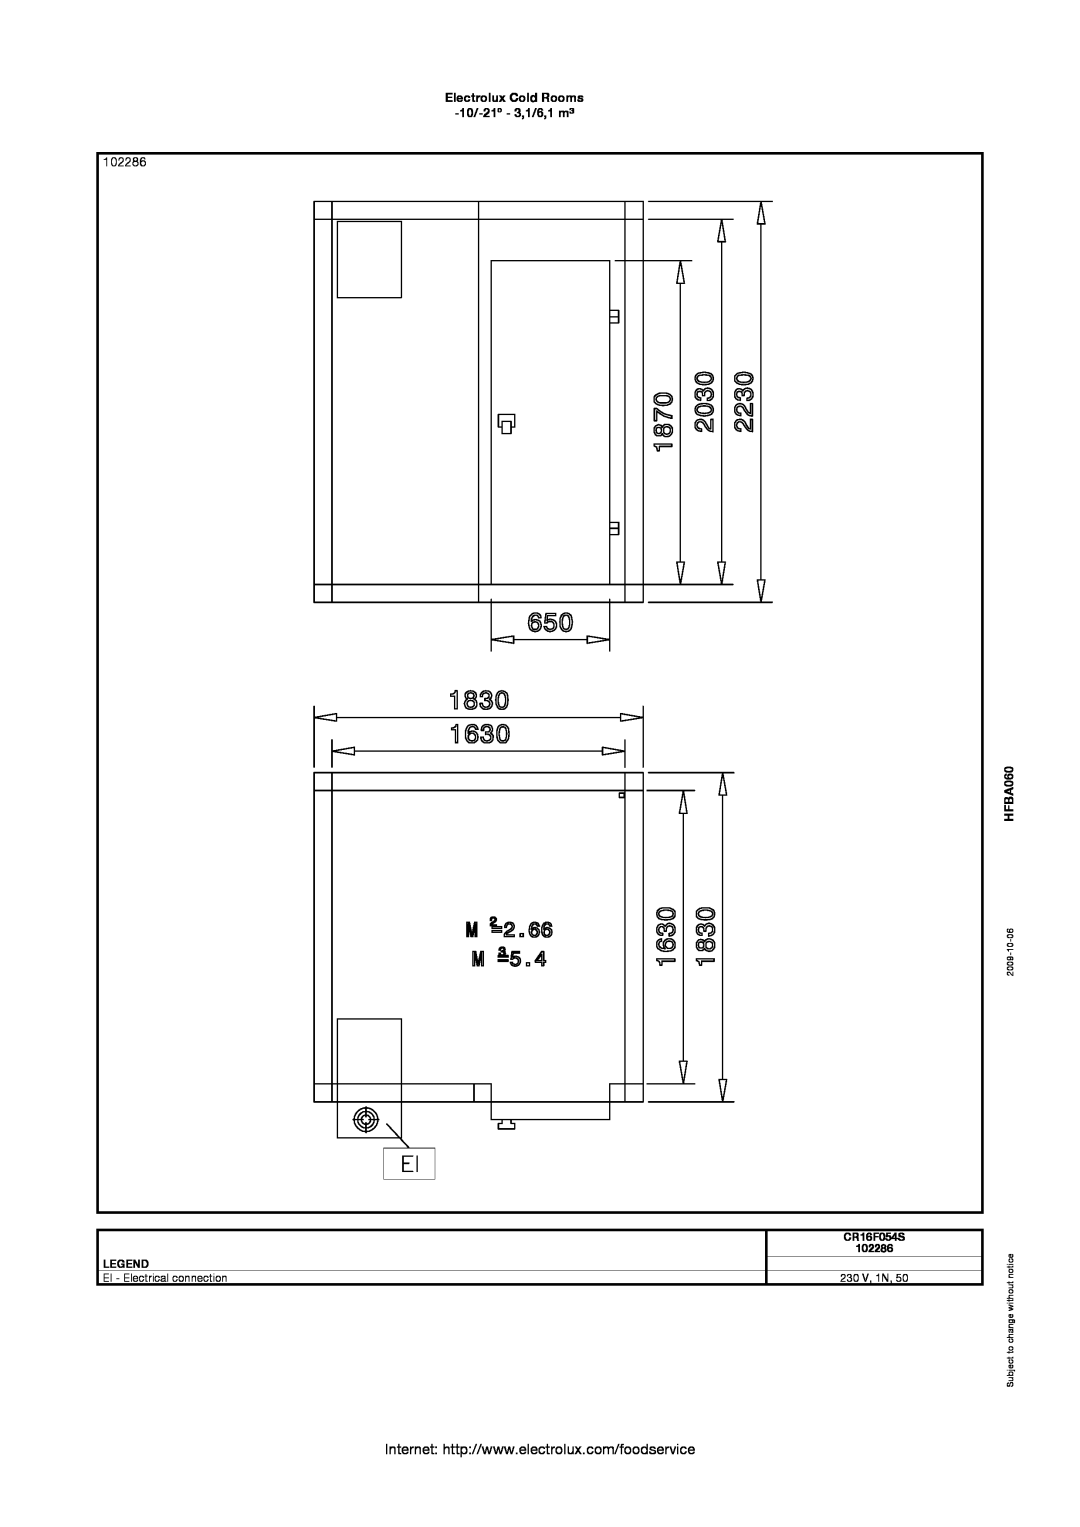 Electrolux 102295 manual 102286, Electrolux Cold Rooms 10/-21º - 3,1/6,1 m³, HFBA060, CR16F054S, EI - Electrical connection 